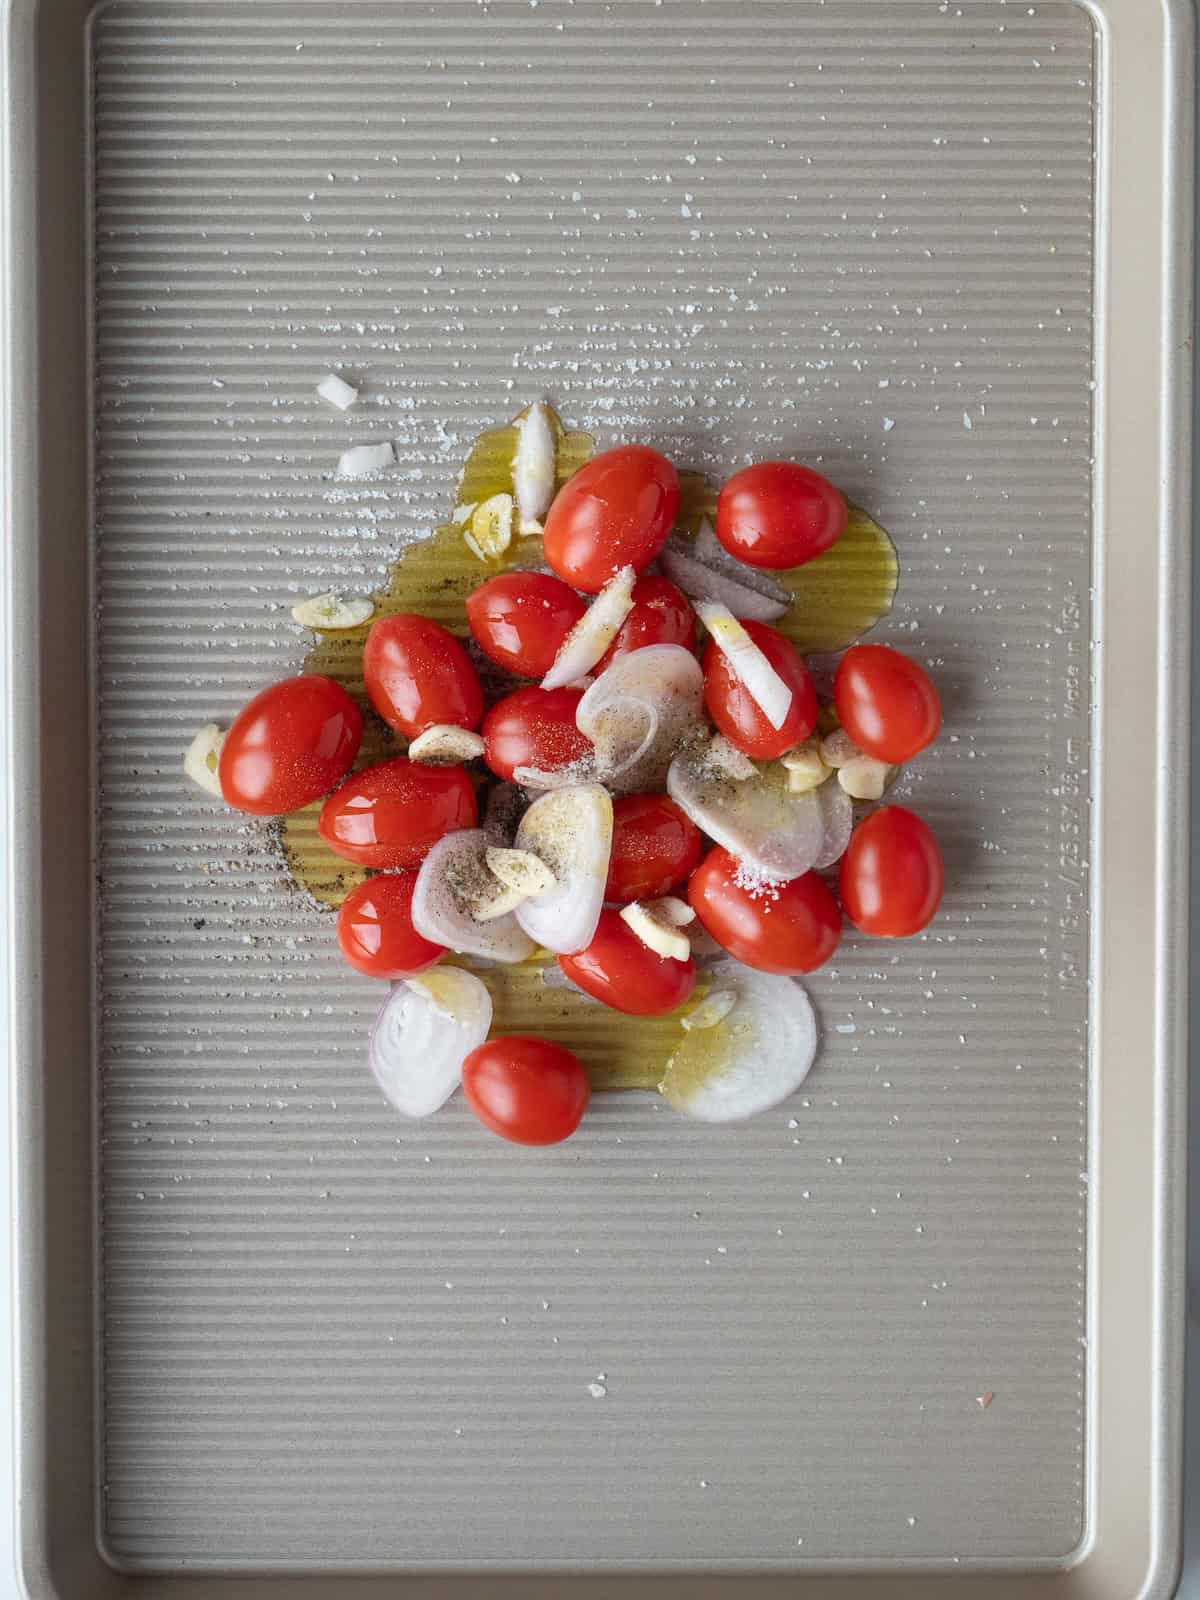 A baking sheet with cherry tomatoes, sliced garlic, shallots and olive oil along with salt and pepper.